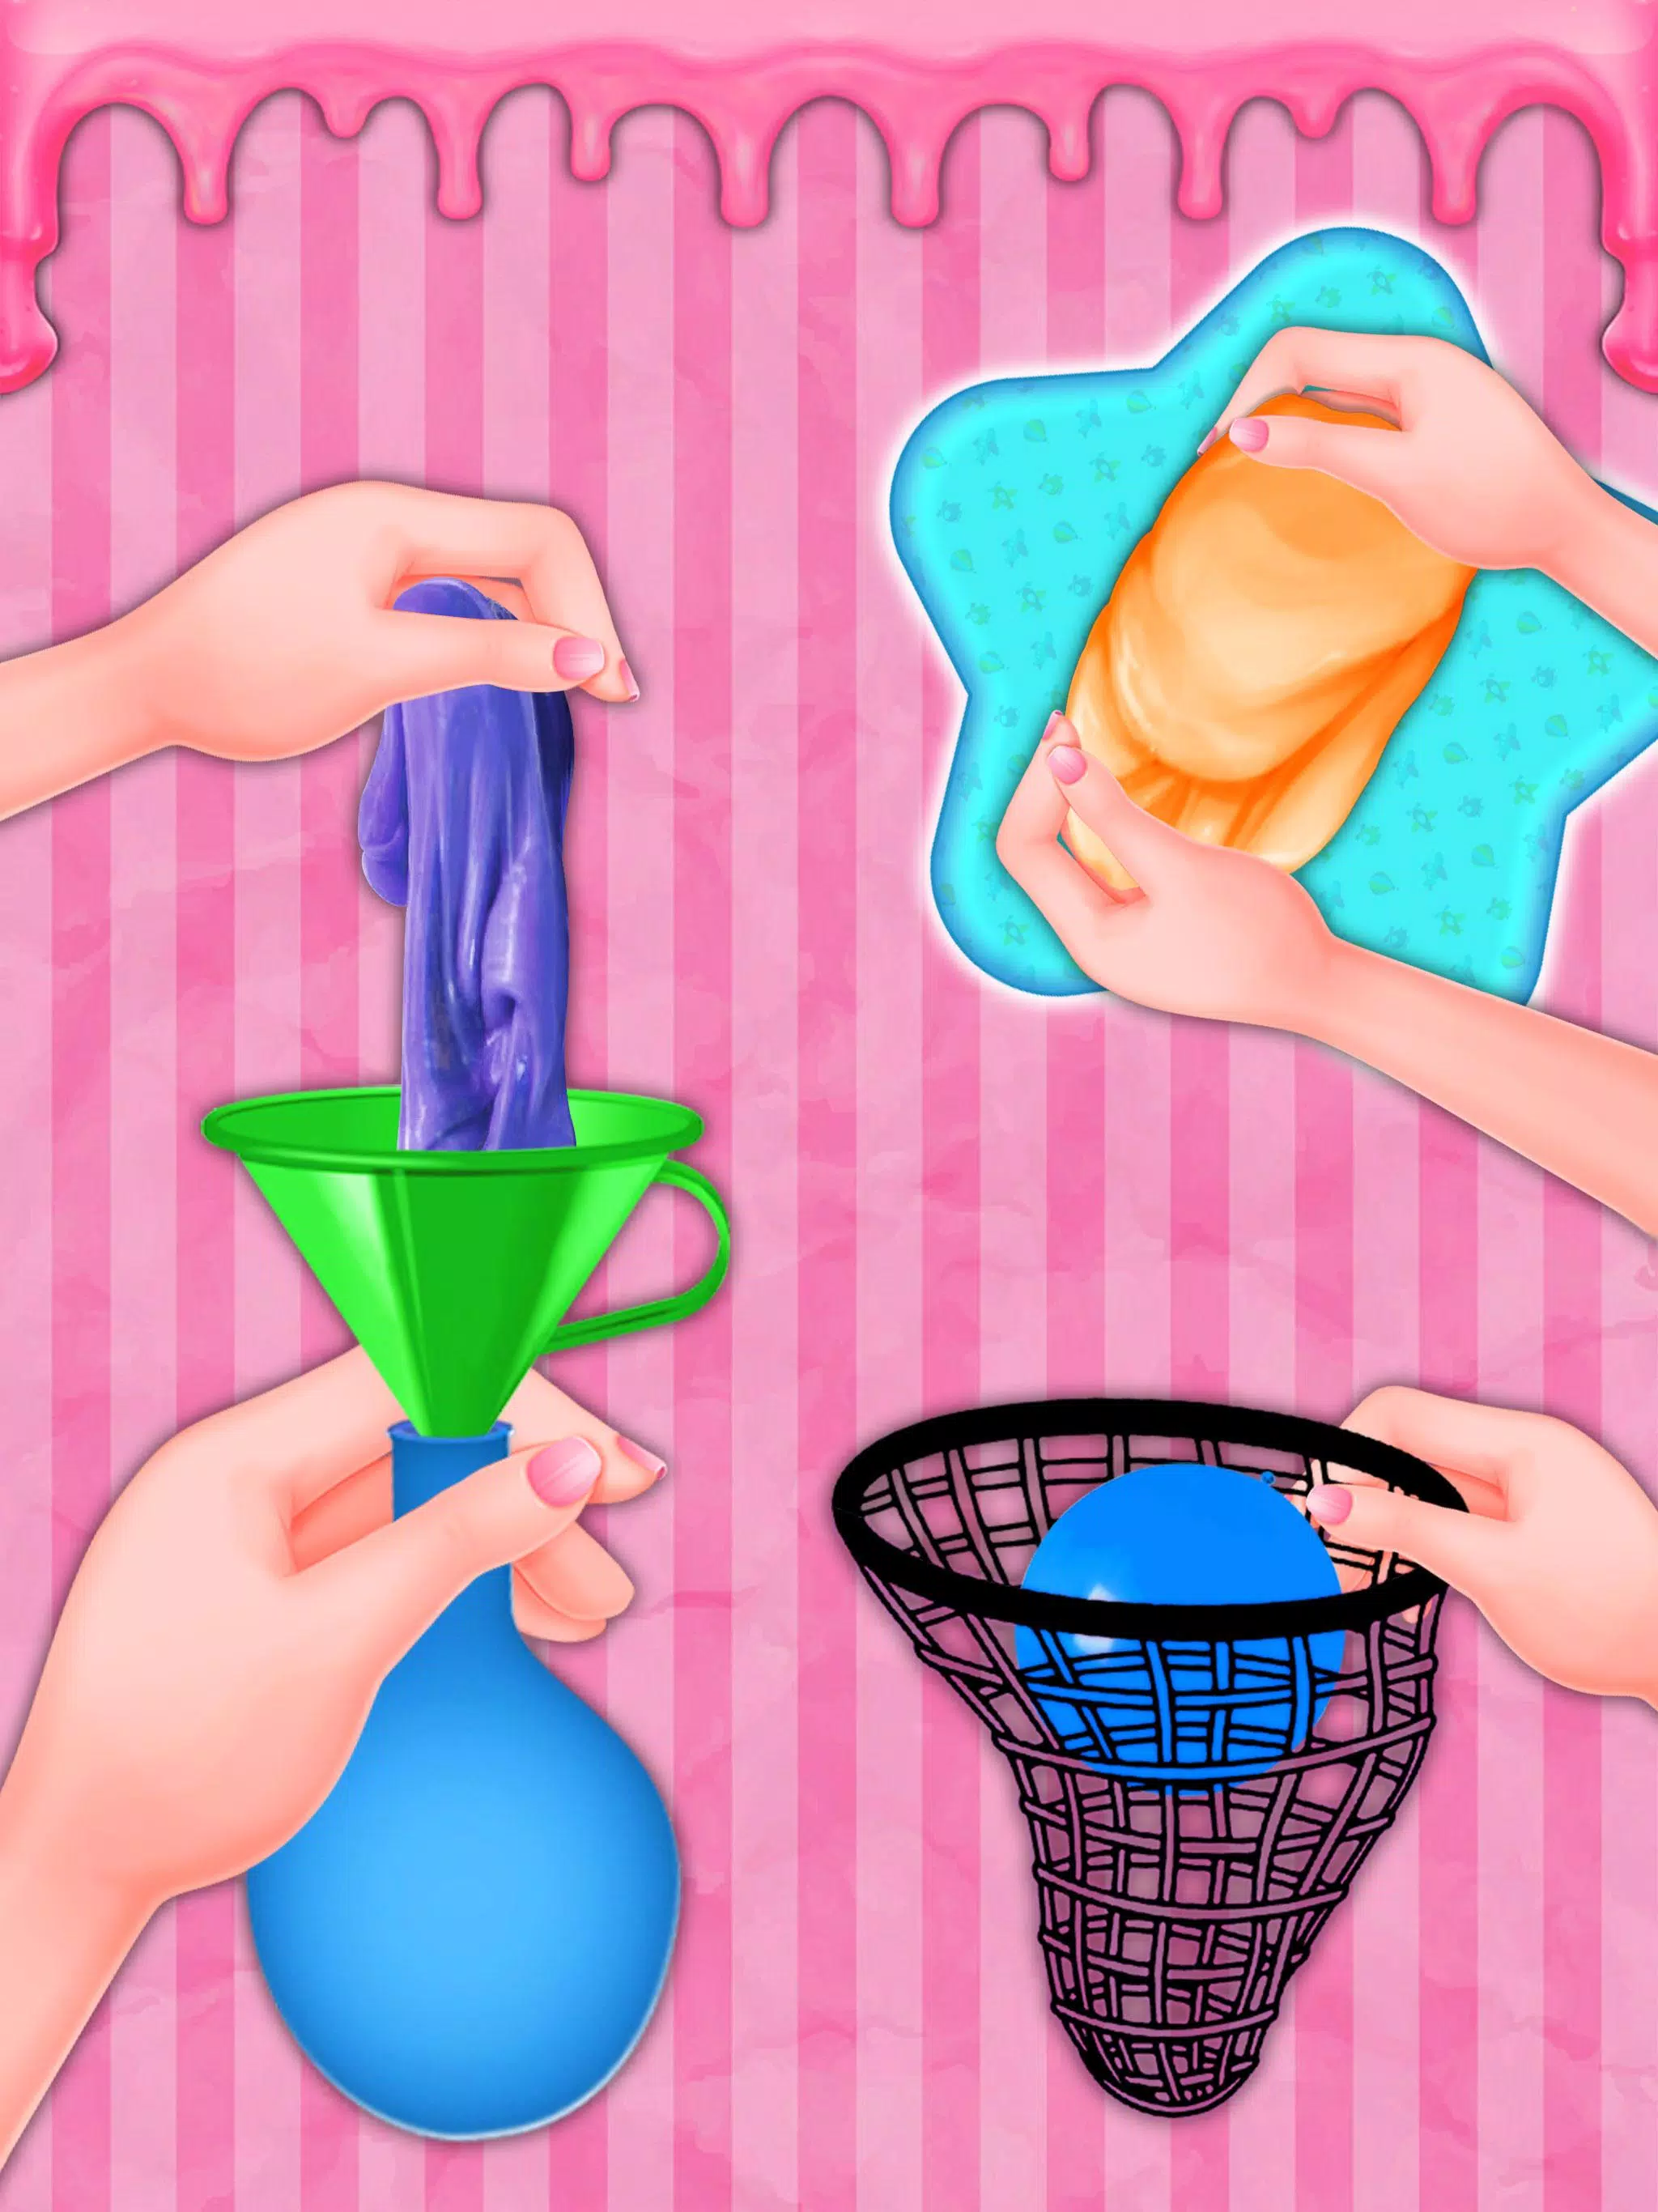 Squishy Maker APK for Android Download